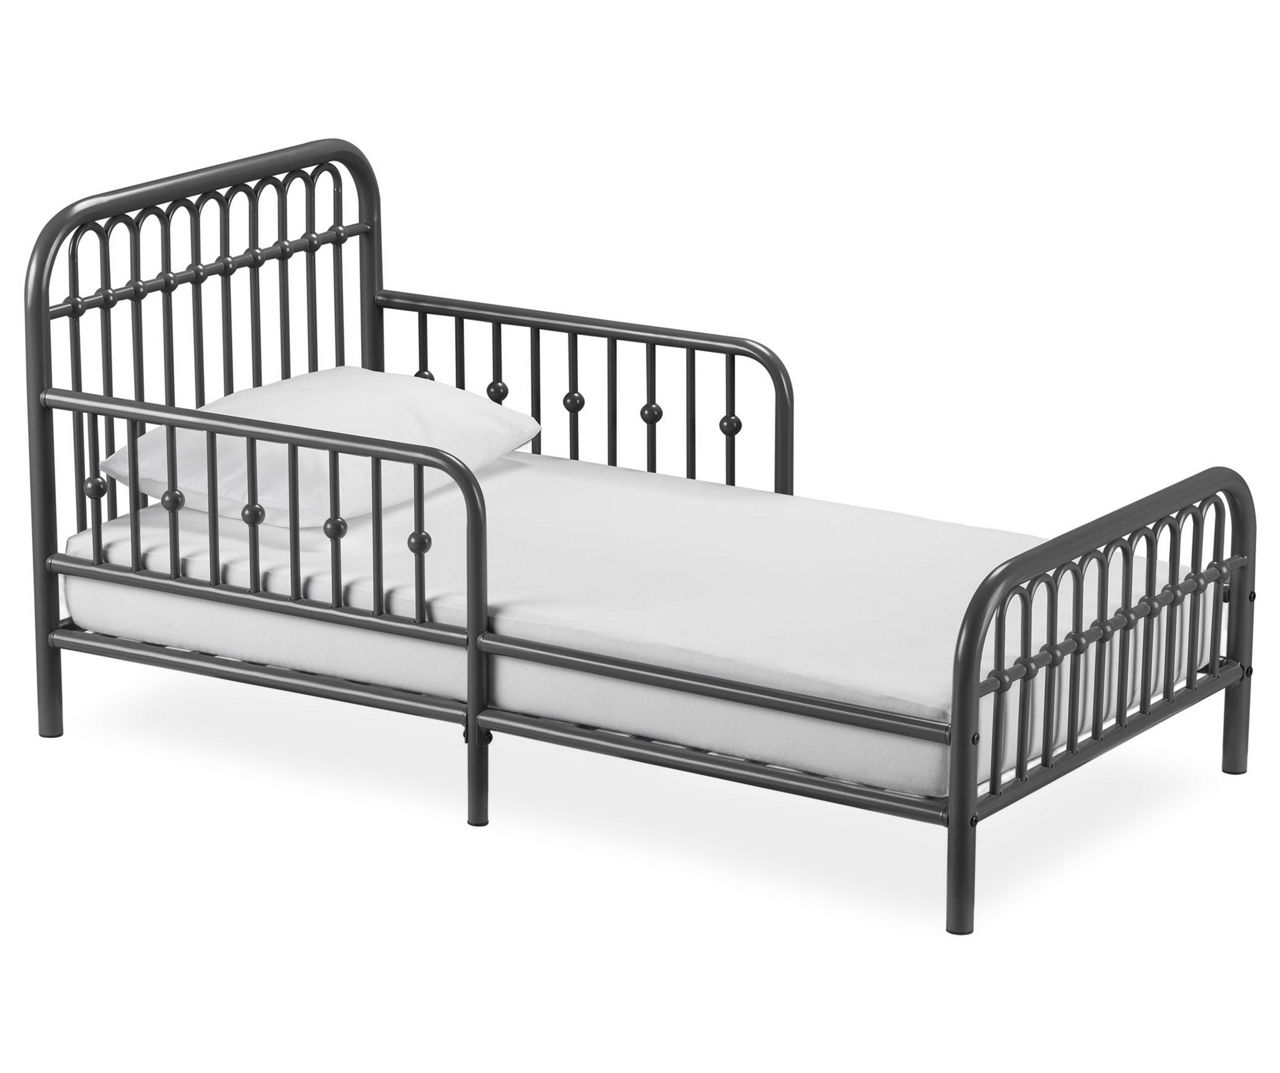 Monarch Hill Ivy Gray Metal Toddler Bed